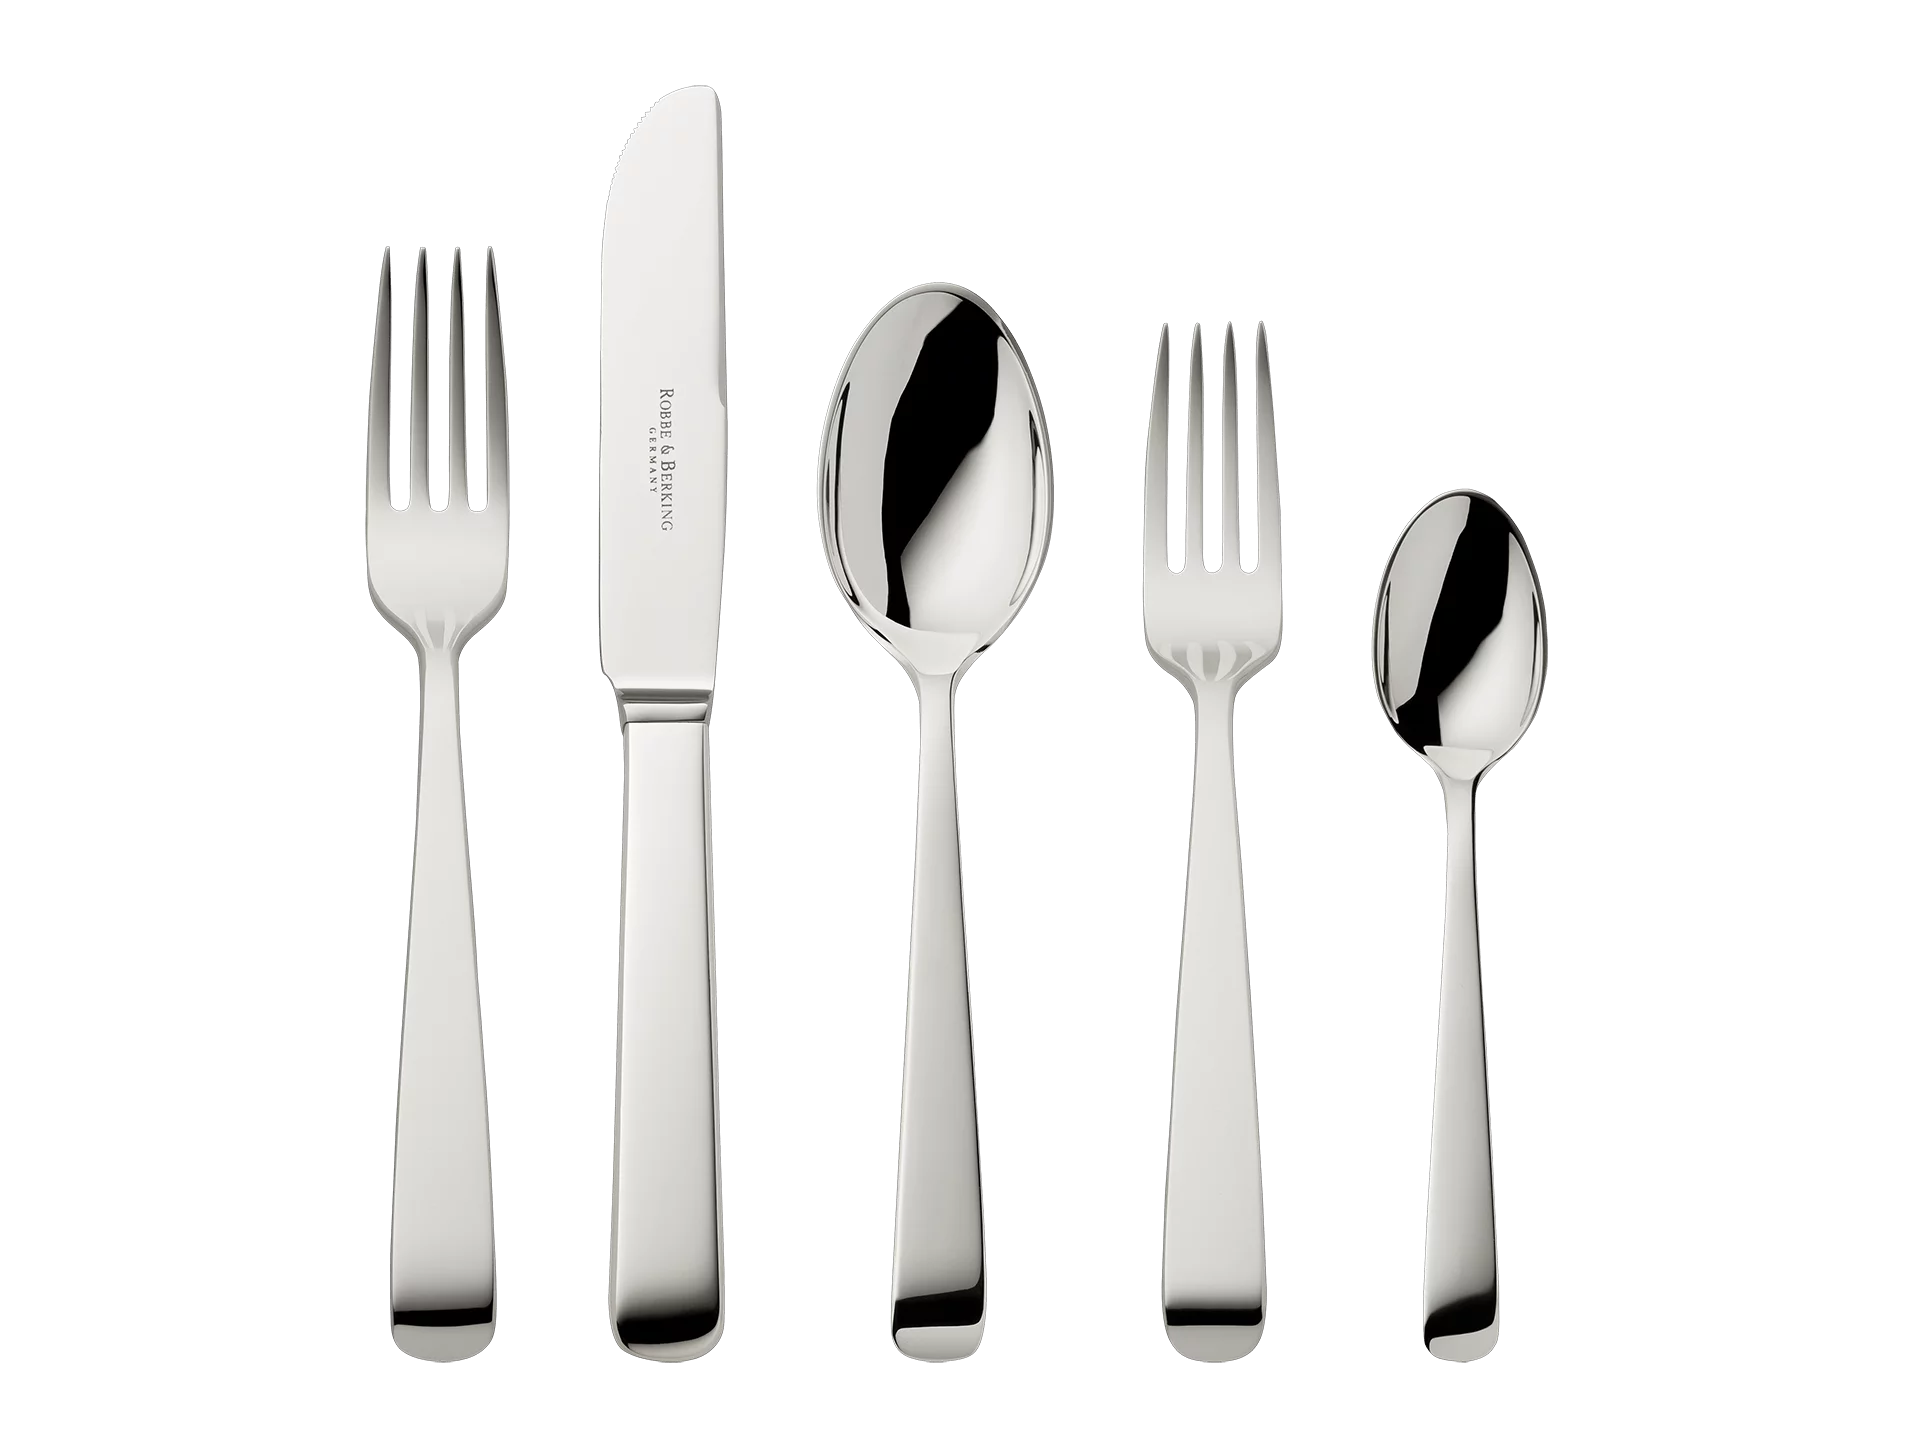 Alta 5-piece place setting (150g massive silverplated)